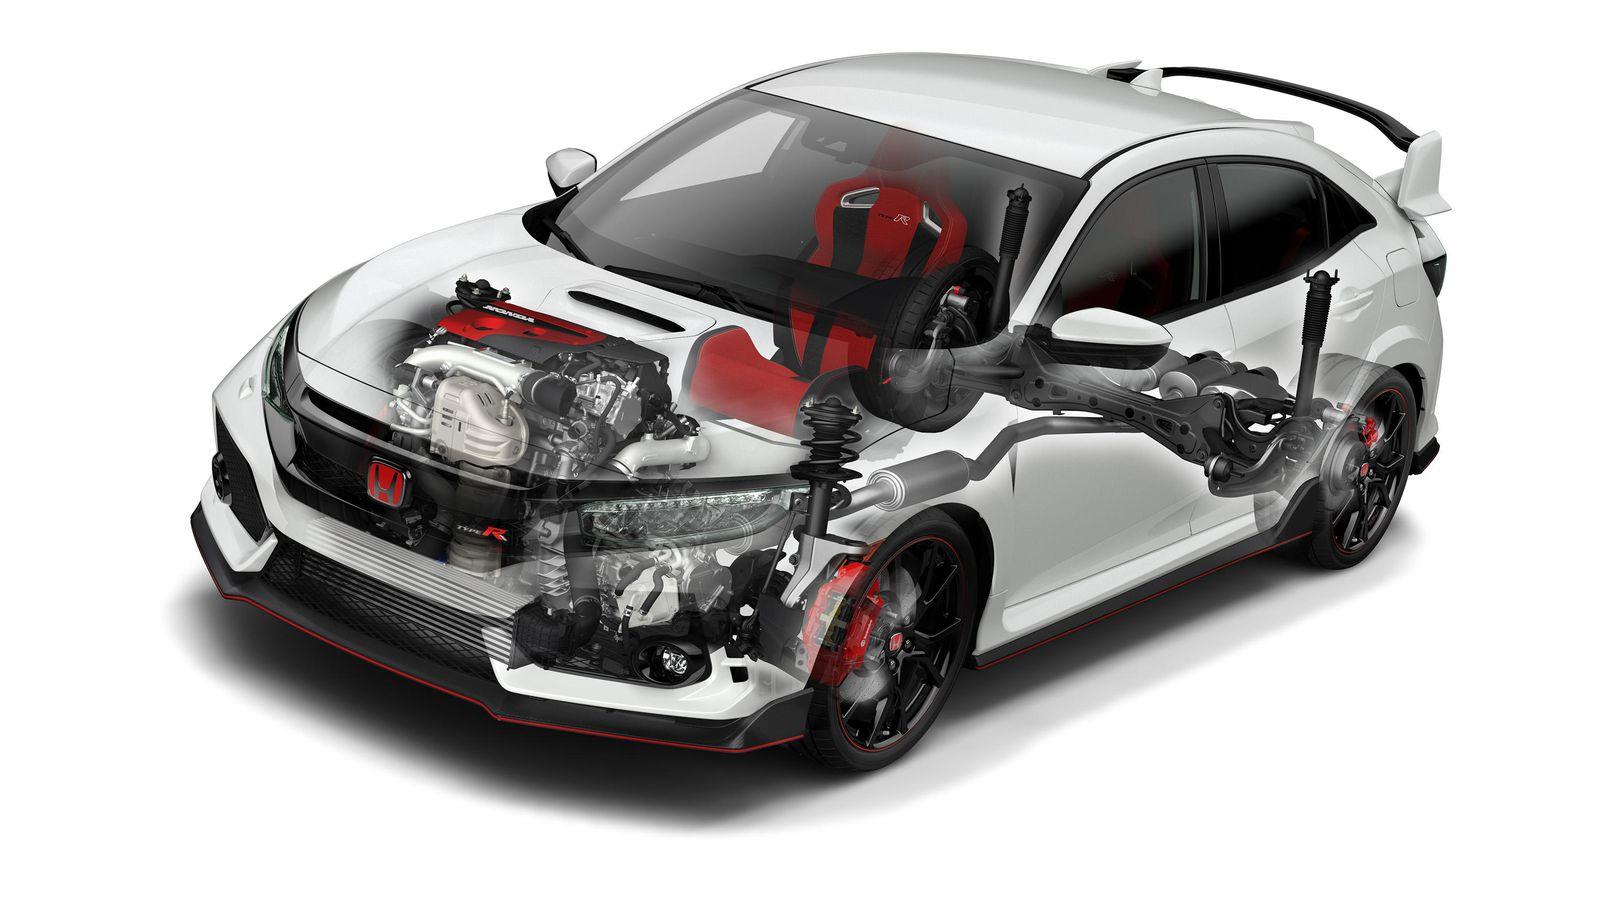 Honda Civic Type R picks up new gray paint, more physical